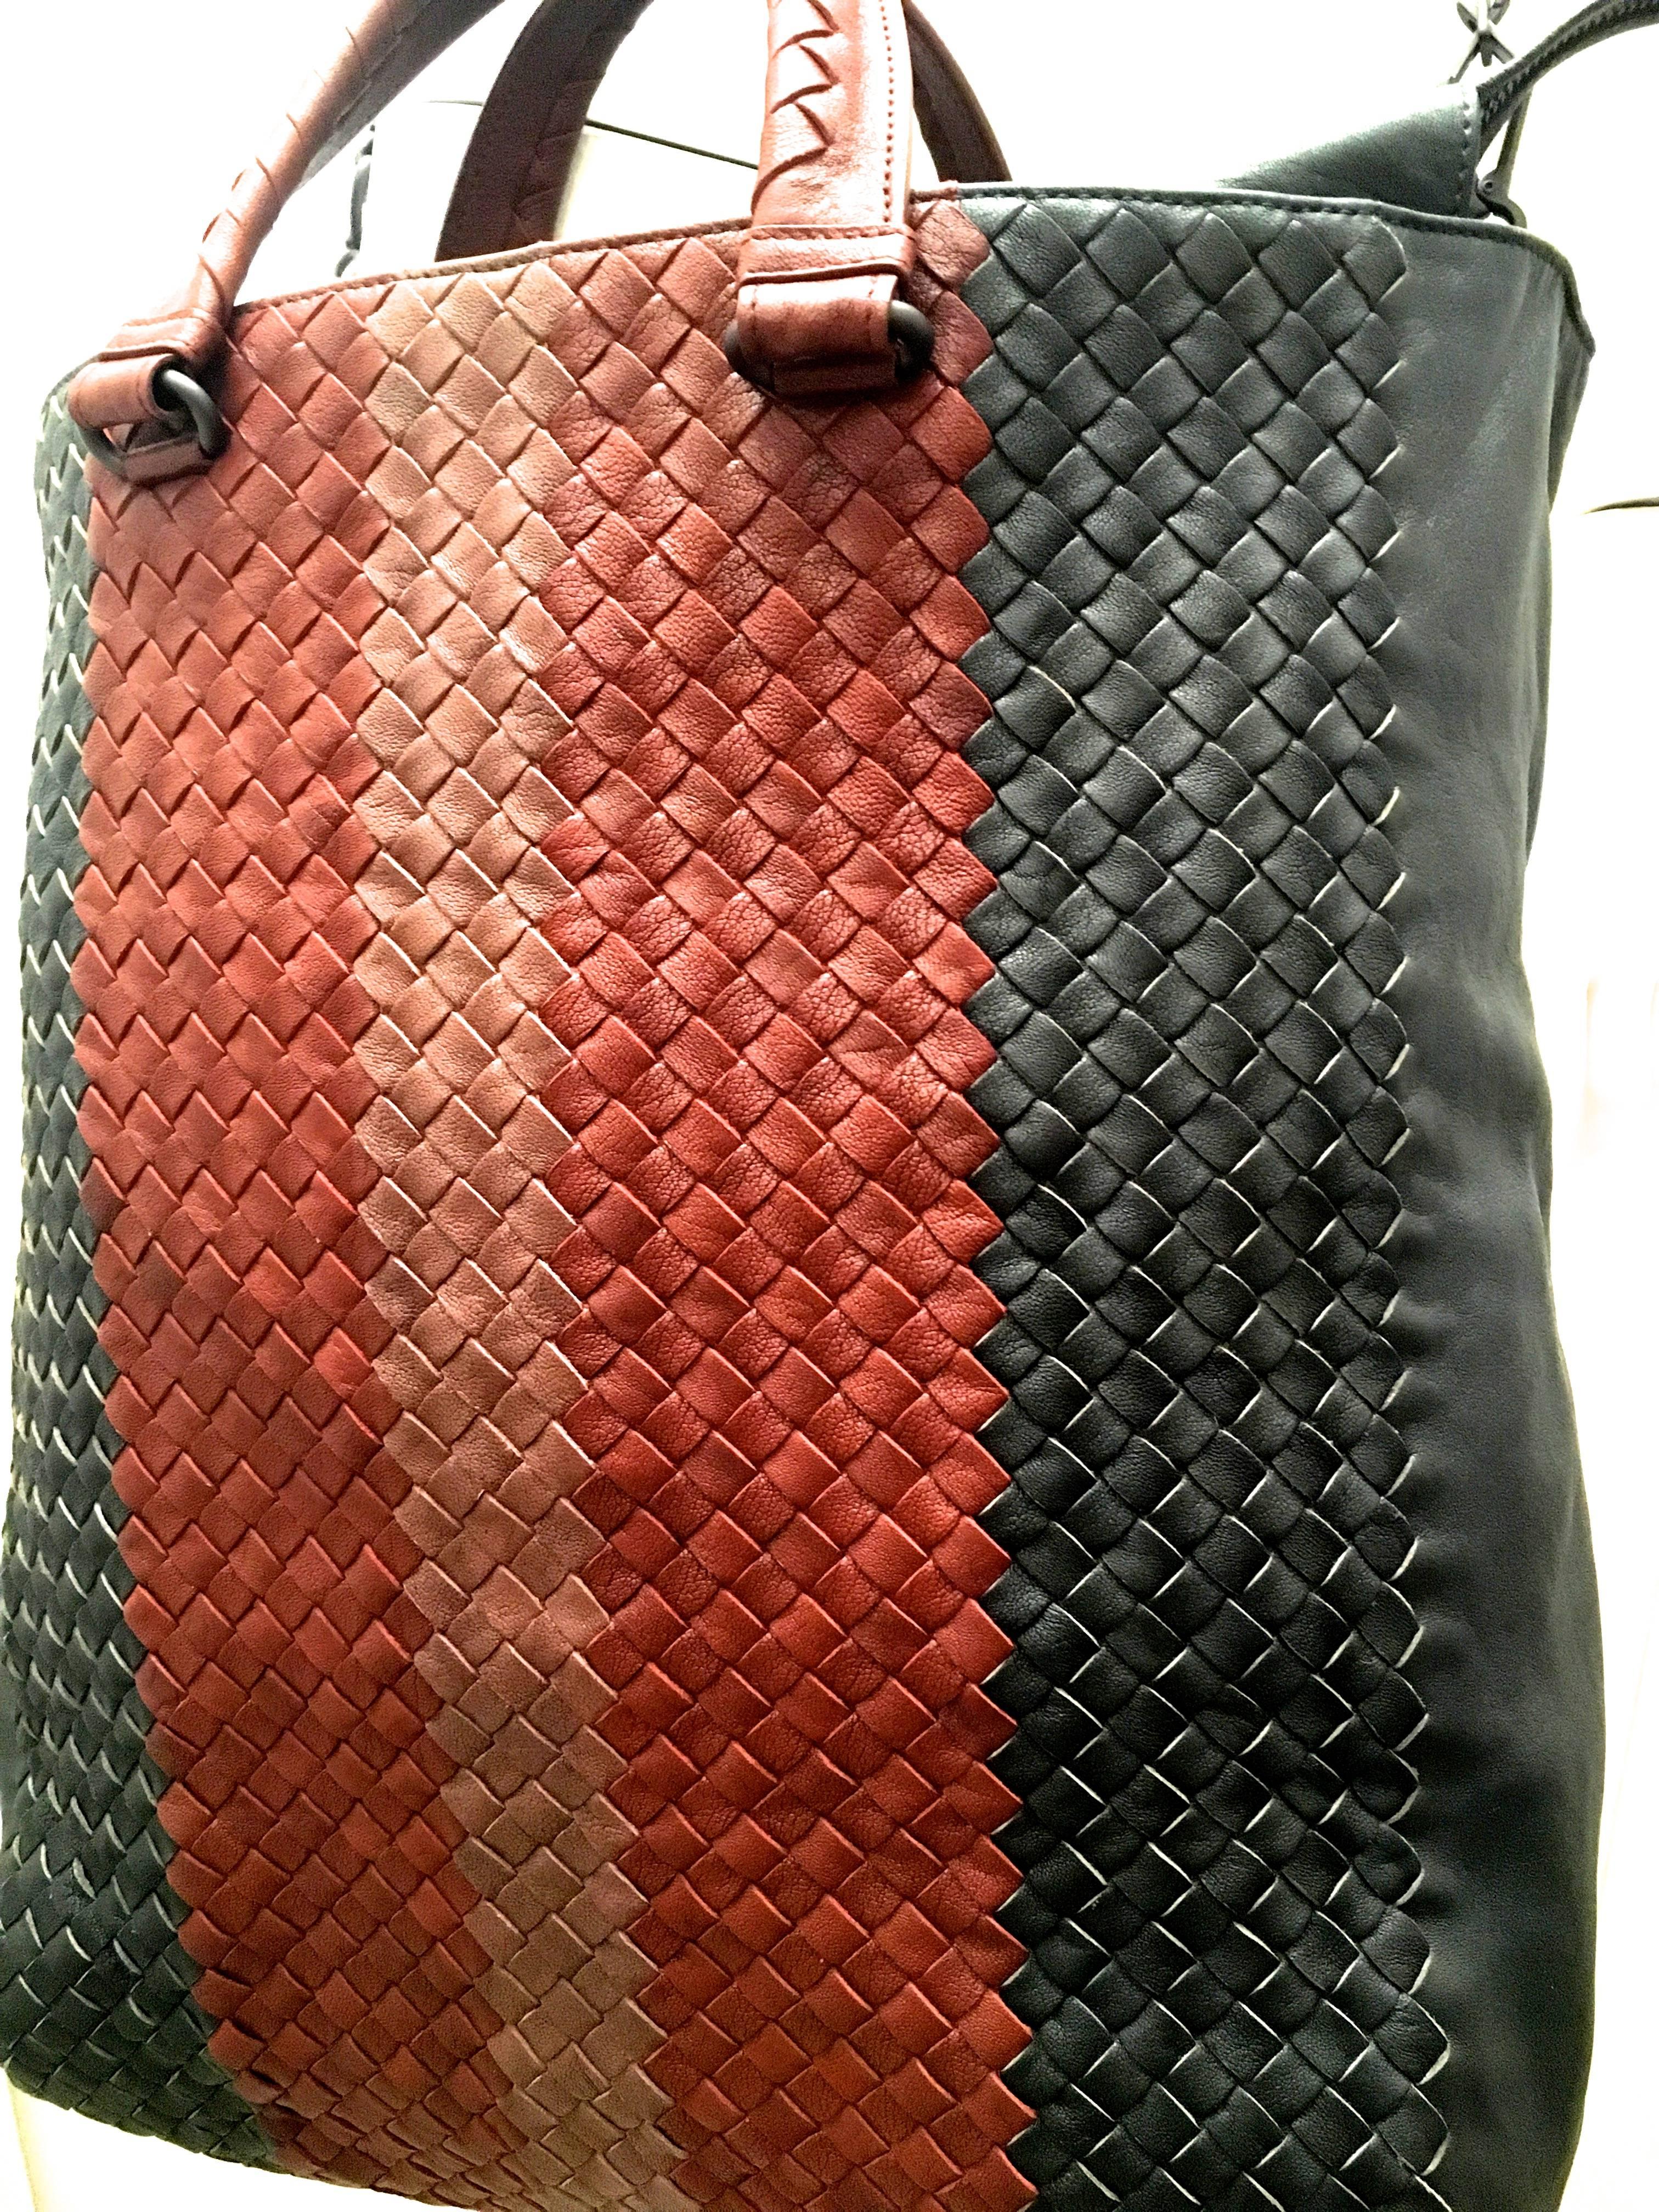 Presented here is a magnificent extra large bag from Bottega Veneta. This large sized tote can be used as a briefcase, a purse, or a crossbody bag. It consists of three colors in the marvelous woven leather Bottega Veneta is known for. The outside